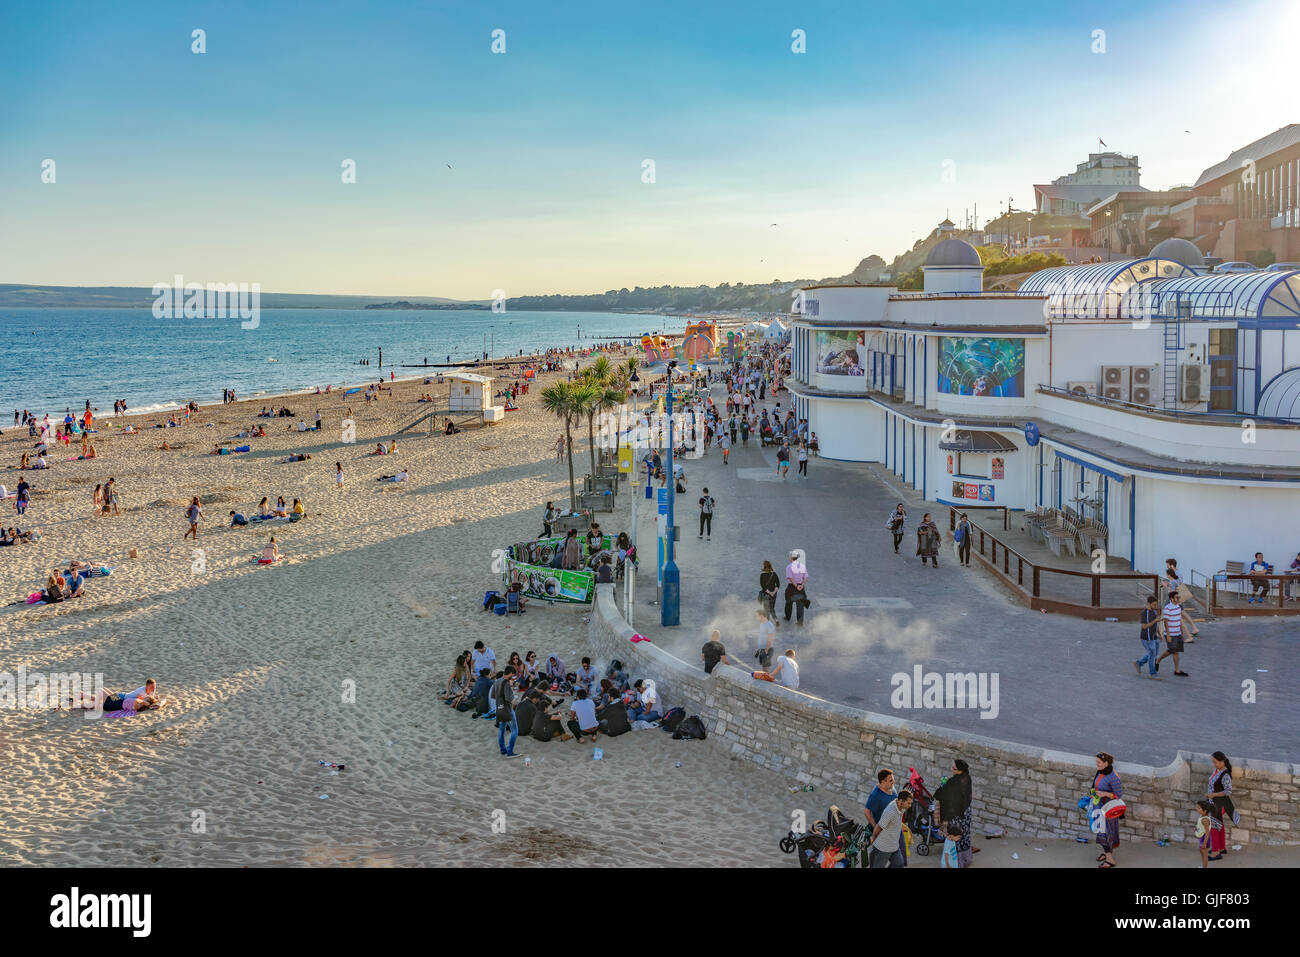 Day trippers and holidaymakers enjoy the warm weather and clear waters of Bournemouth beach on the UK's south coast. Stock Photo